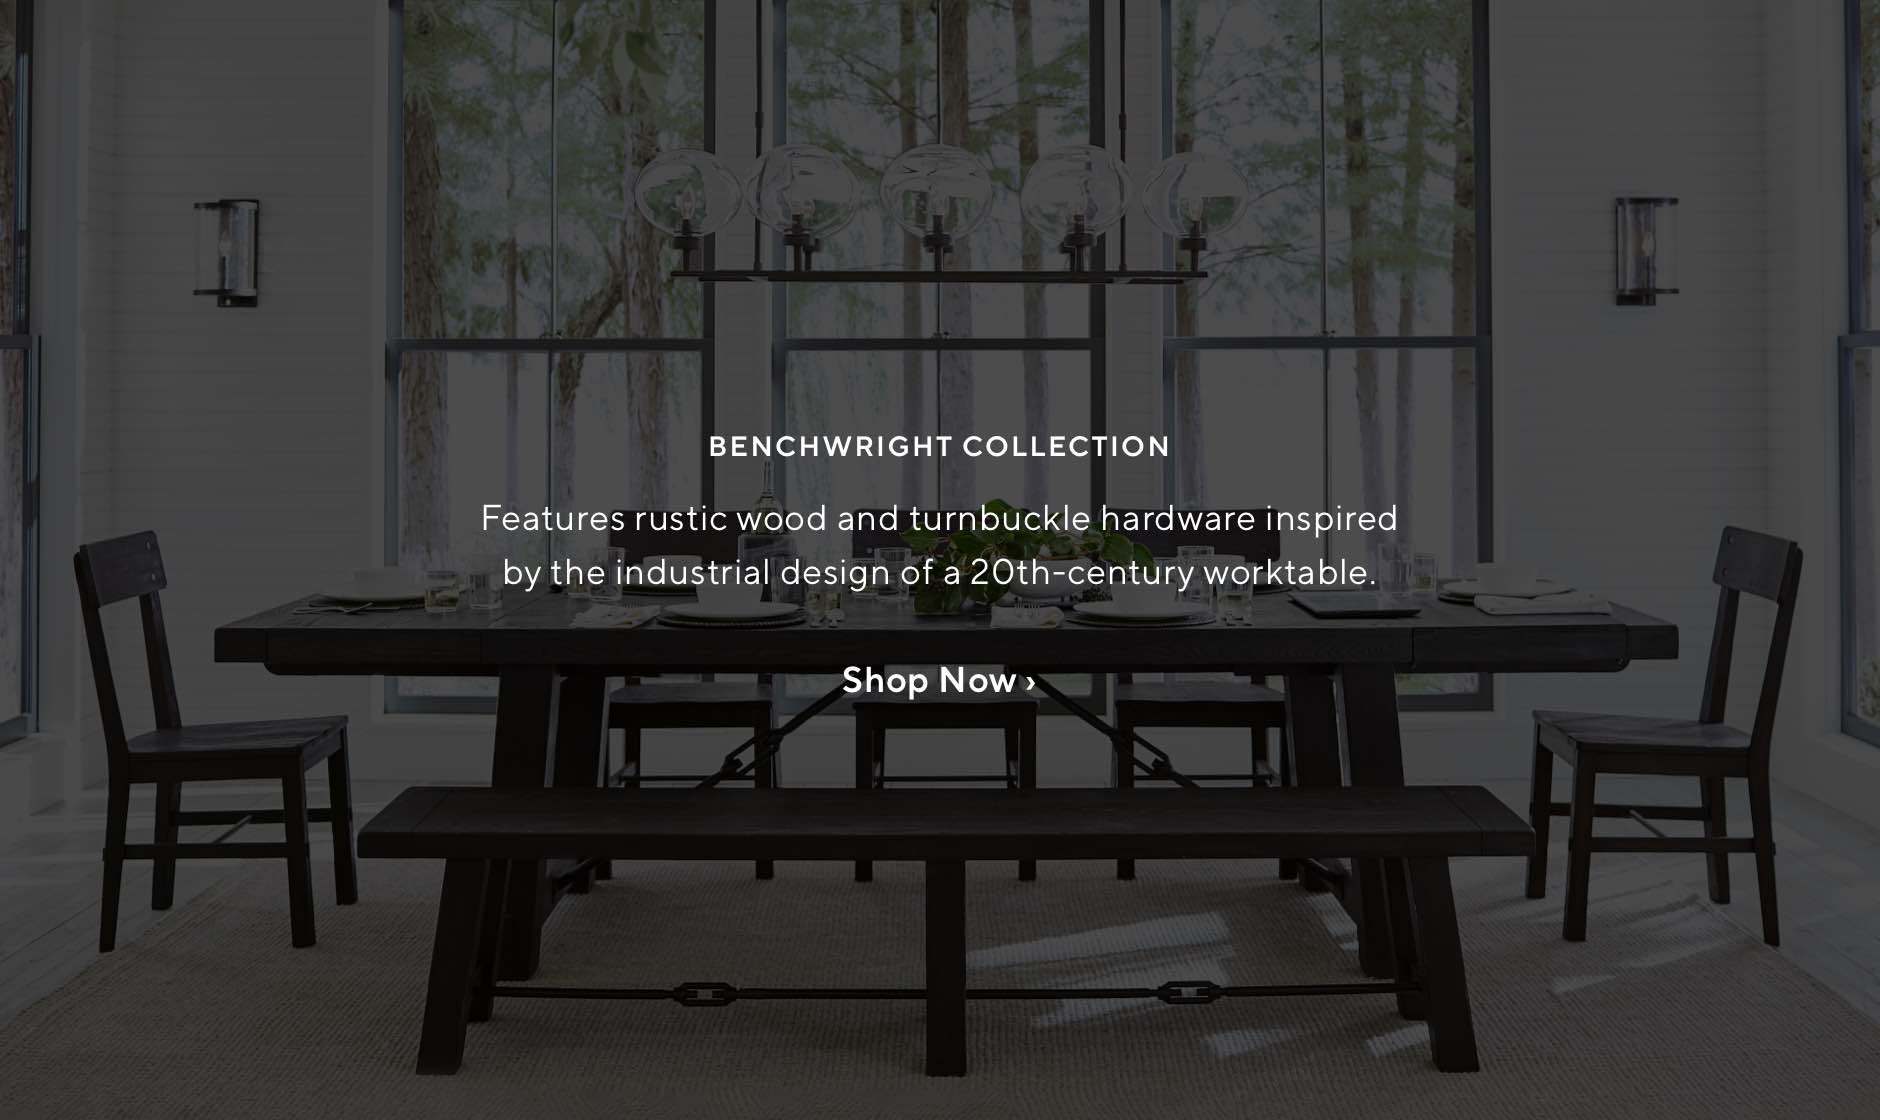 BENCHWRIGHT COLLECTION